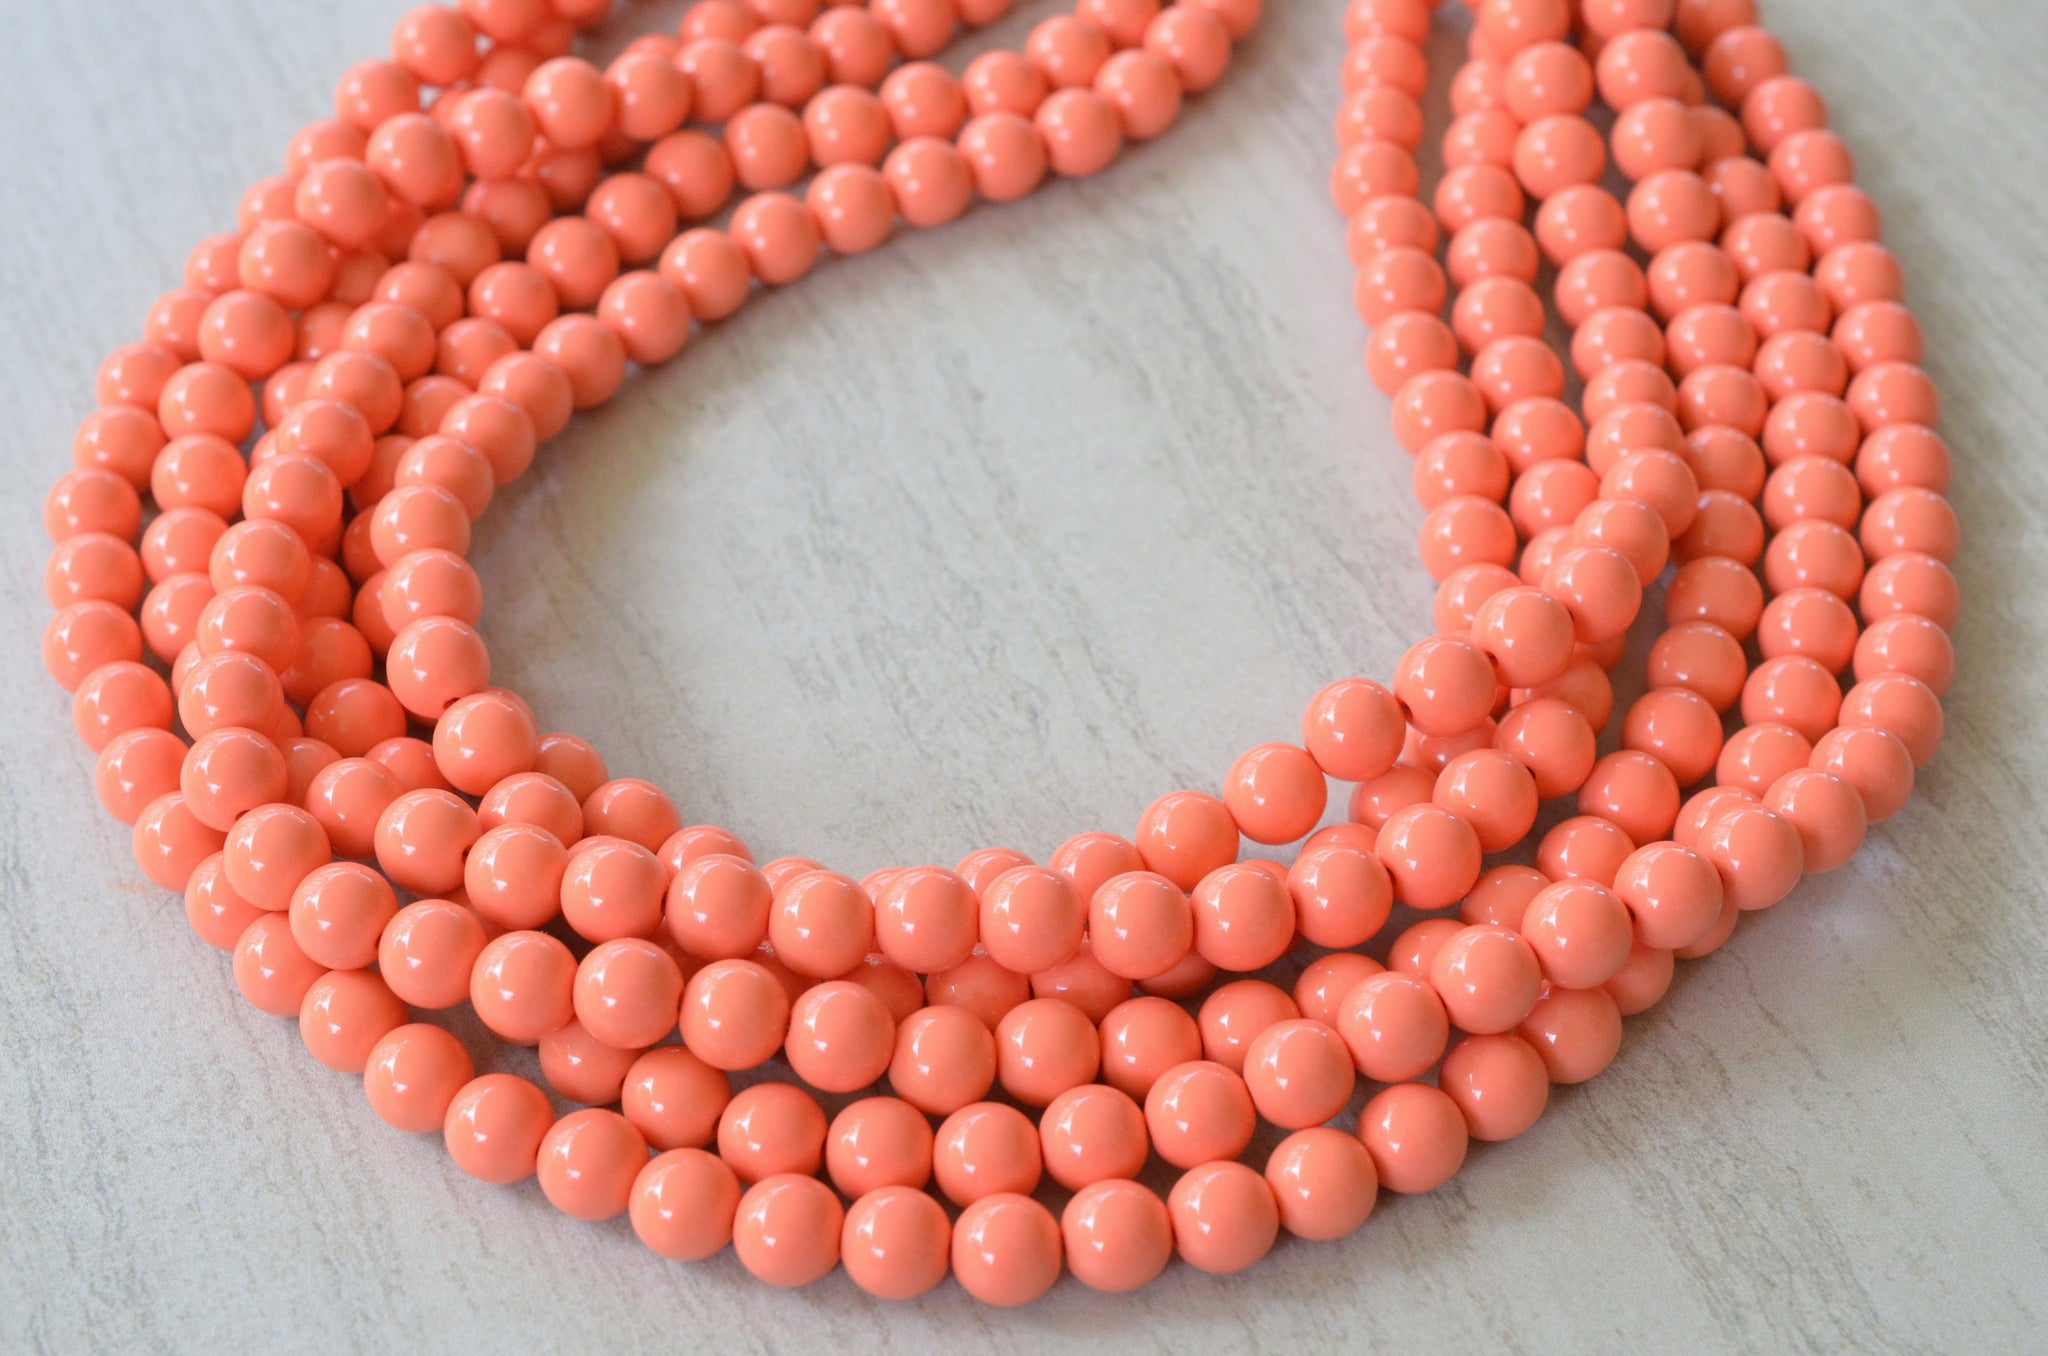 Vintage Orange and Gold Layered Statement Necklace with Multistrand Ribbon  | eBay